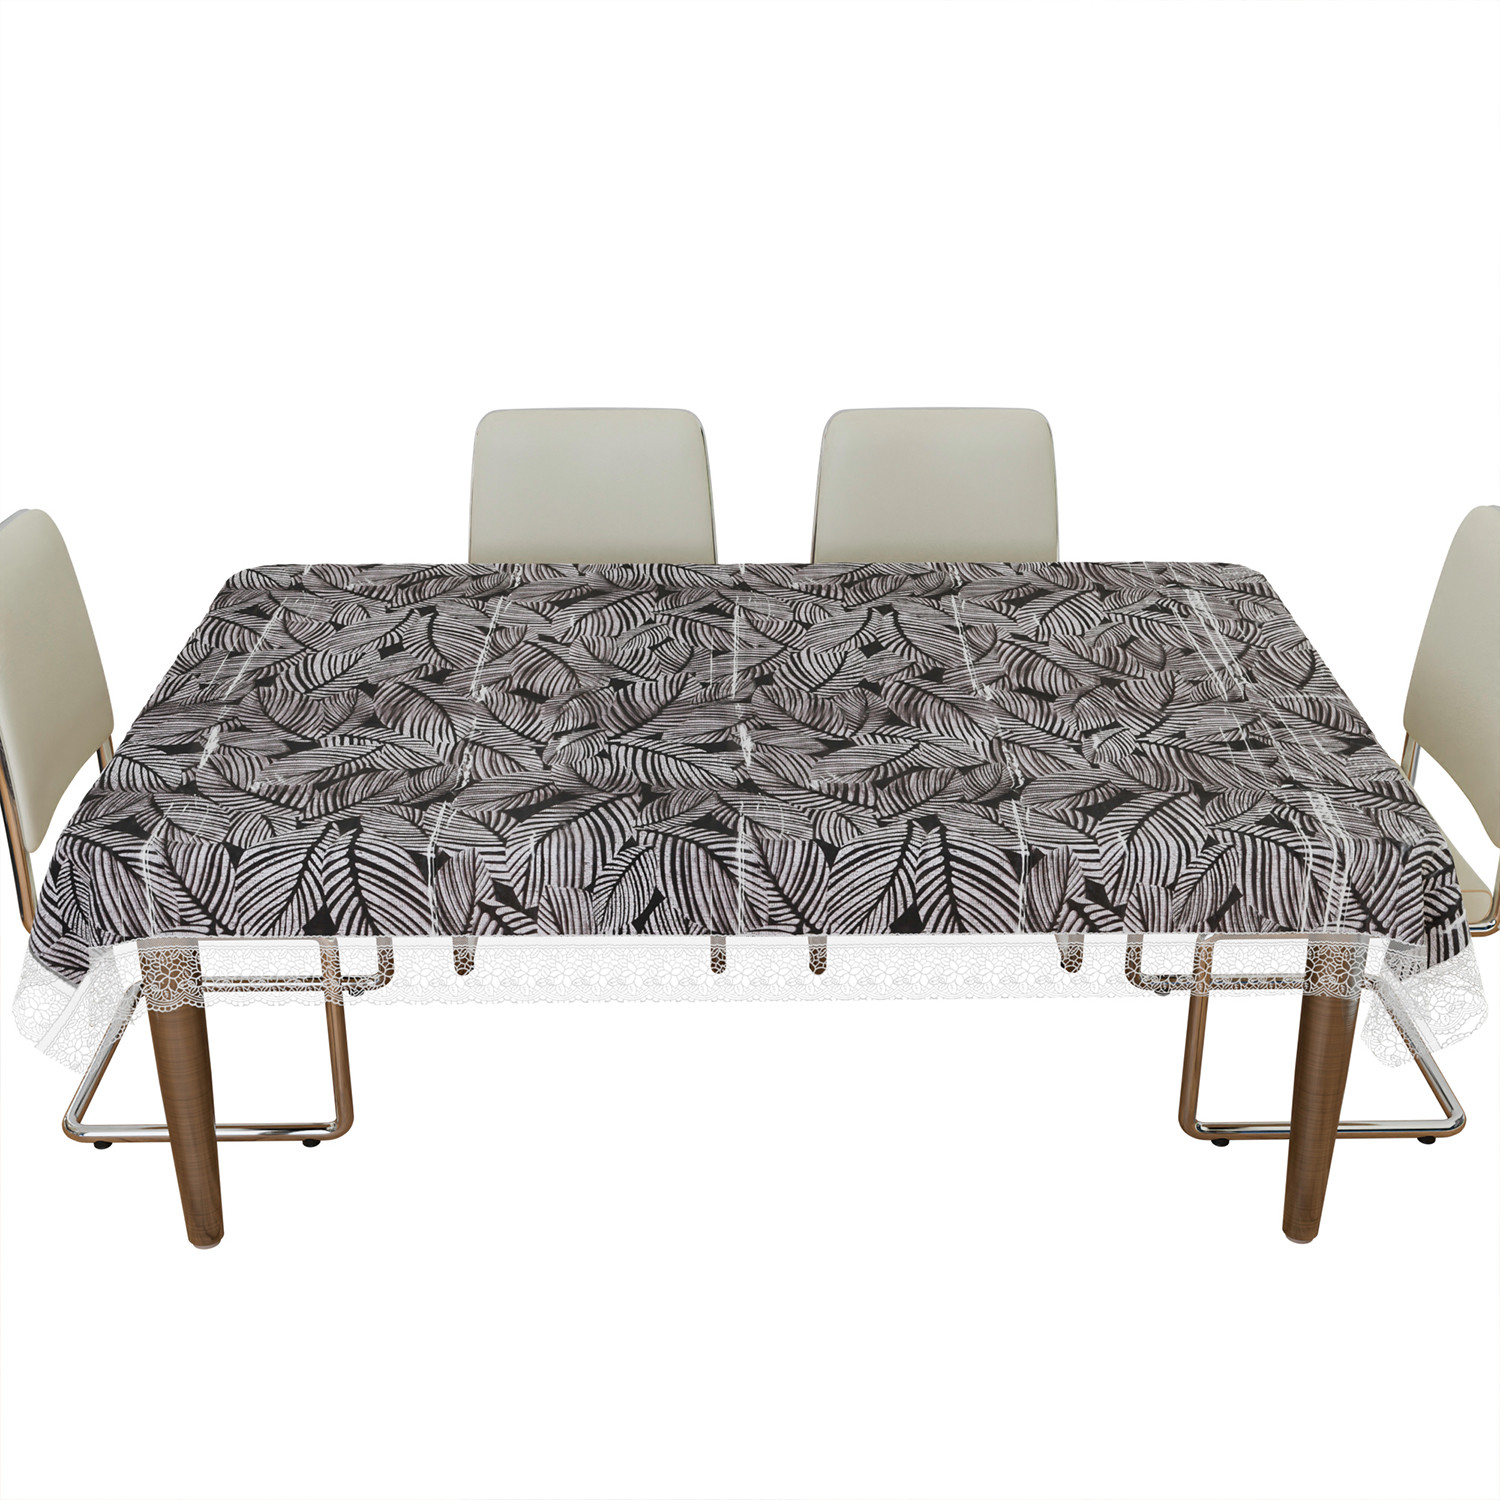 Kuber Industries Dining Table Cover | PVC Table Cloth Cover | 6 Seater Table Cloth | Transparent Leaf Table Cover | Table Protector | Table Cover for Dining Table | 60x90 Inch | DTC | Black